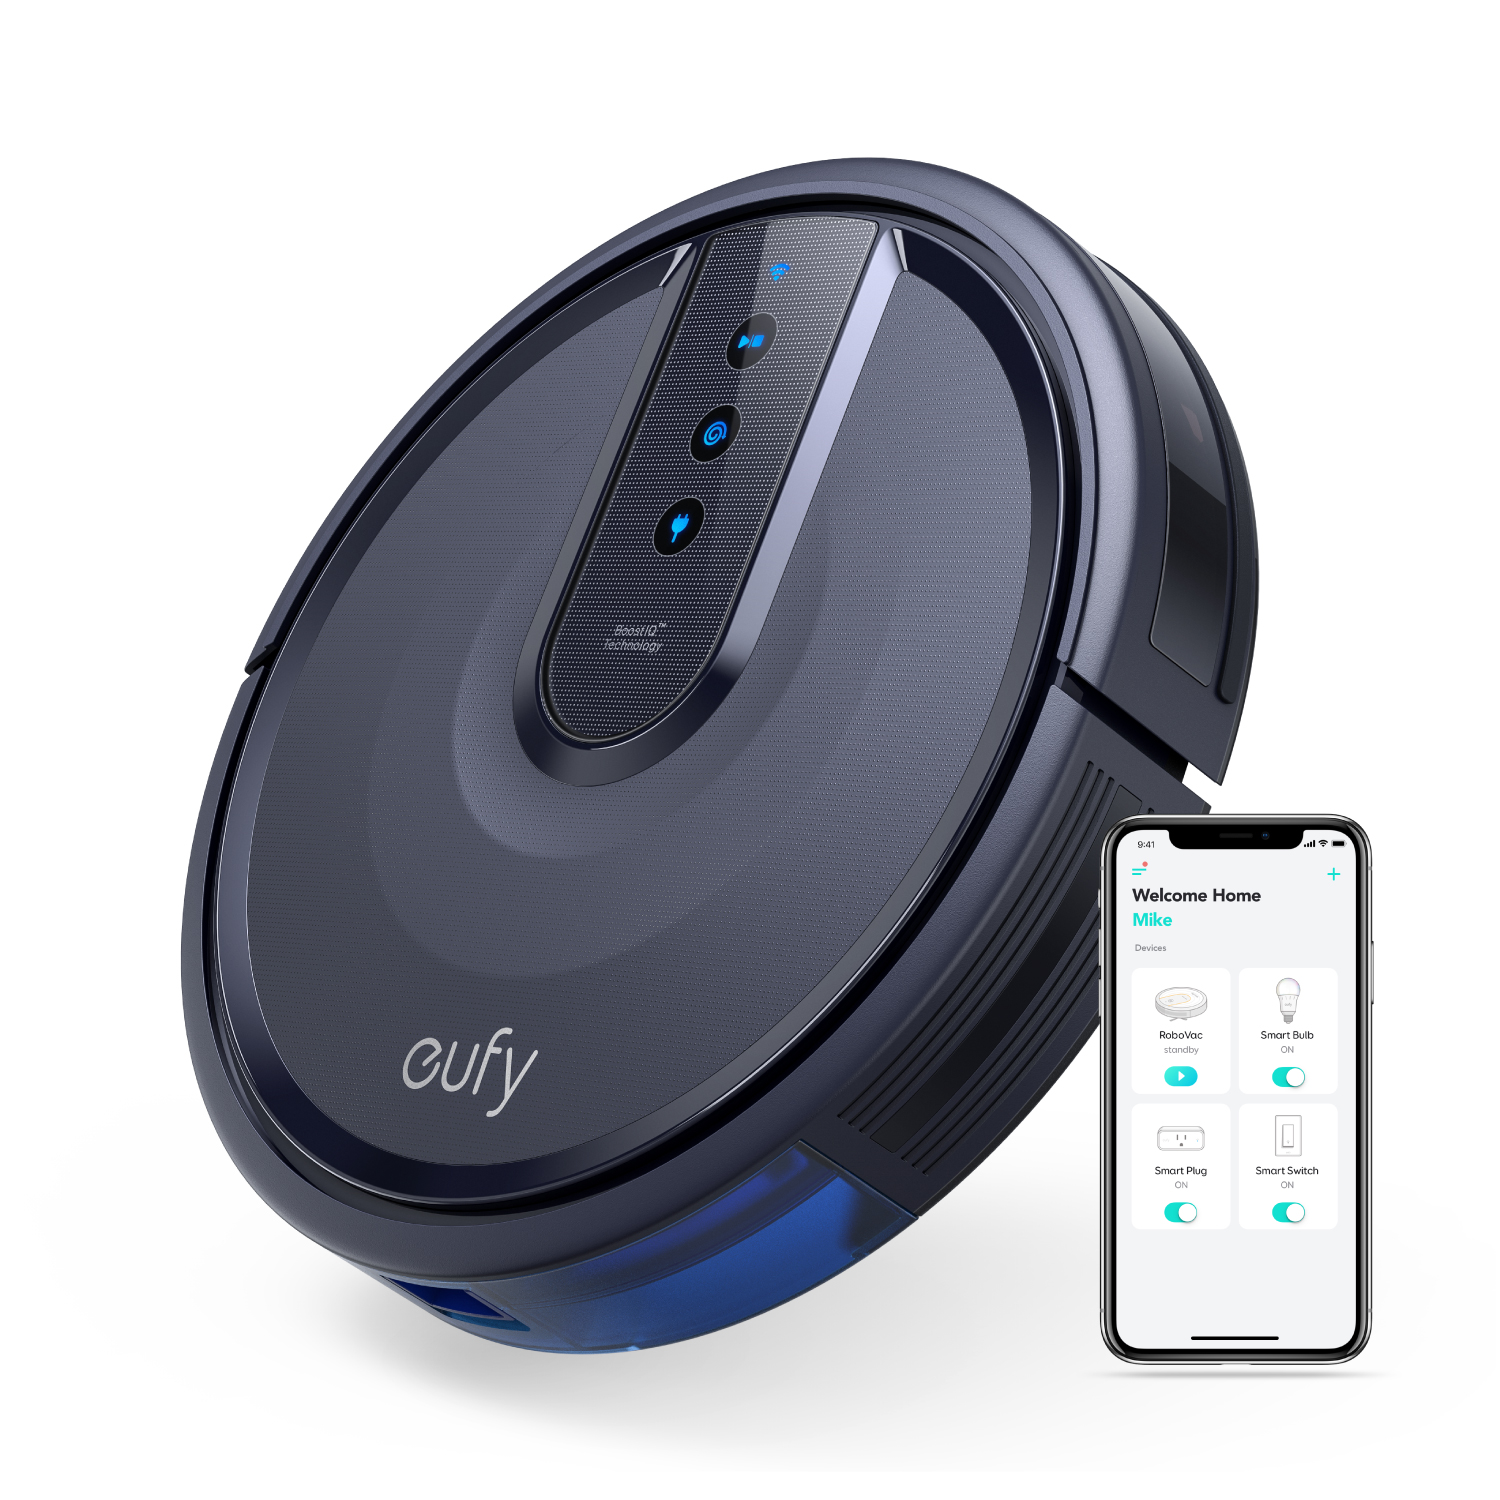 Anker eufy 25C Wi-Fi Connected Robot Vacuum, Great for Picking up Pet Hairs, Quiet, Slim - image 1 of 10